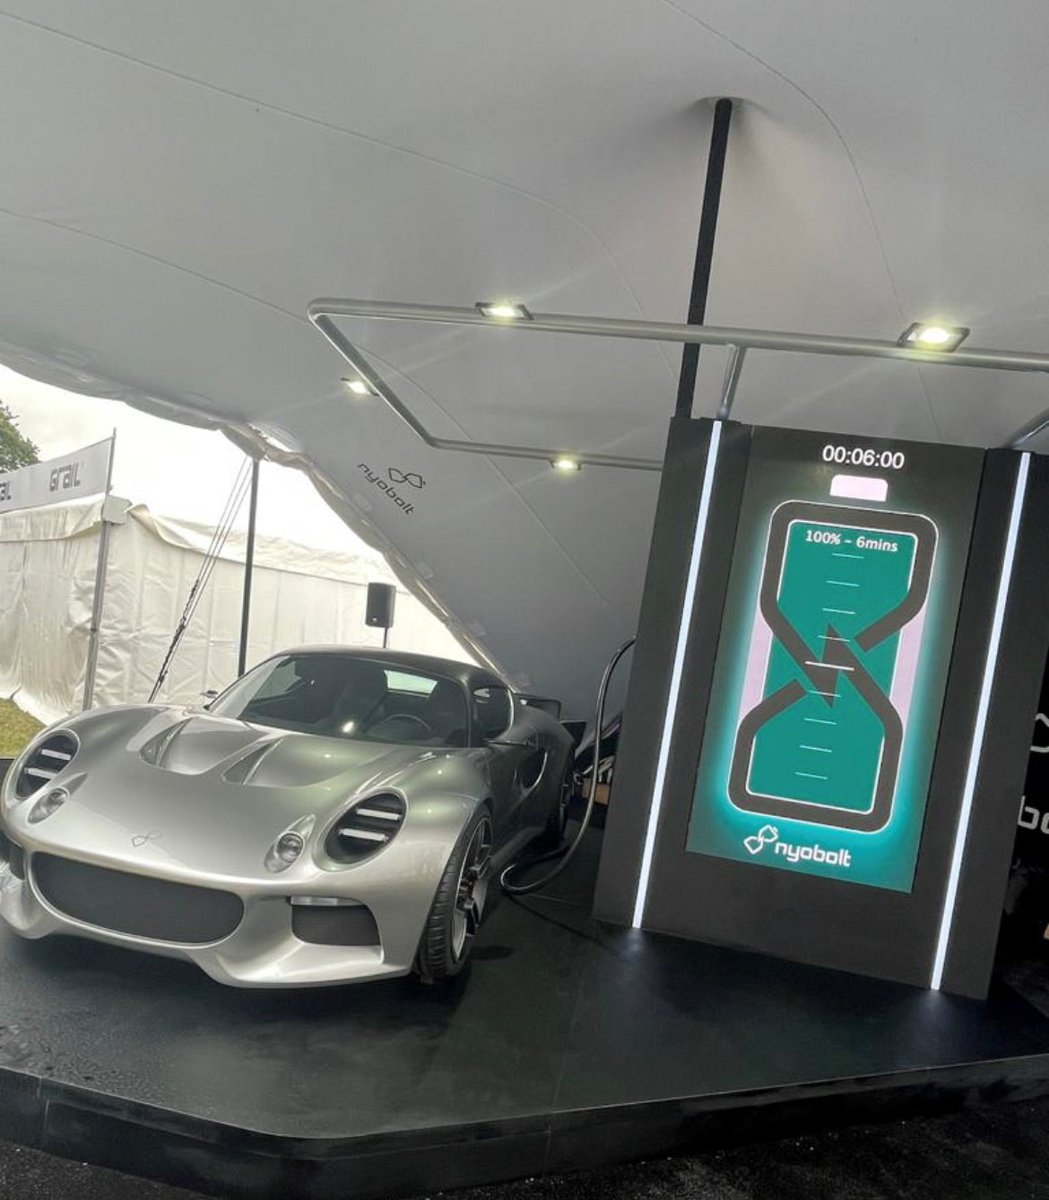 The final day @Goodwood Festival of Speed. Thank you all for visiting us on Friday, the team @Nyobolt alongside our collaboration partners @CALLUM have been wowing the crowds with our 6-minute charge times! #GoodwoodFOS #EV #Fastcharging #morepowerlesstime